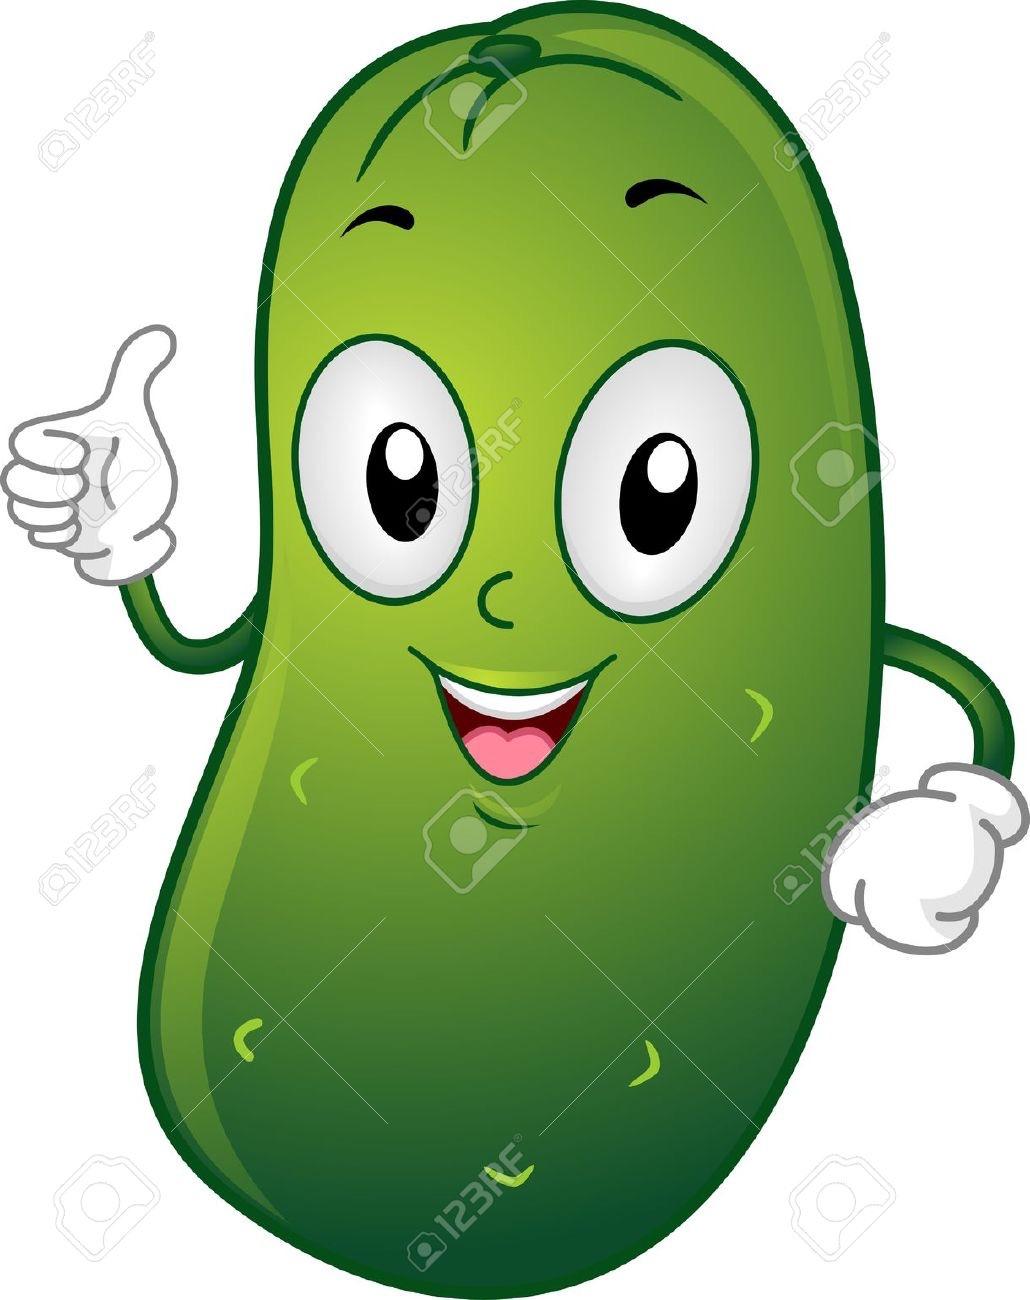 This isnu0027t a meme itu0027s literally just stock photo clipart of a pickle ClipartLook.com 